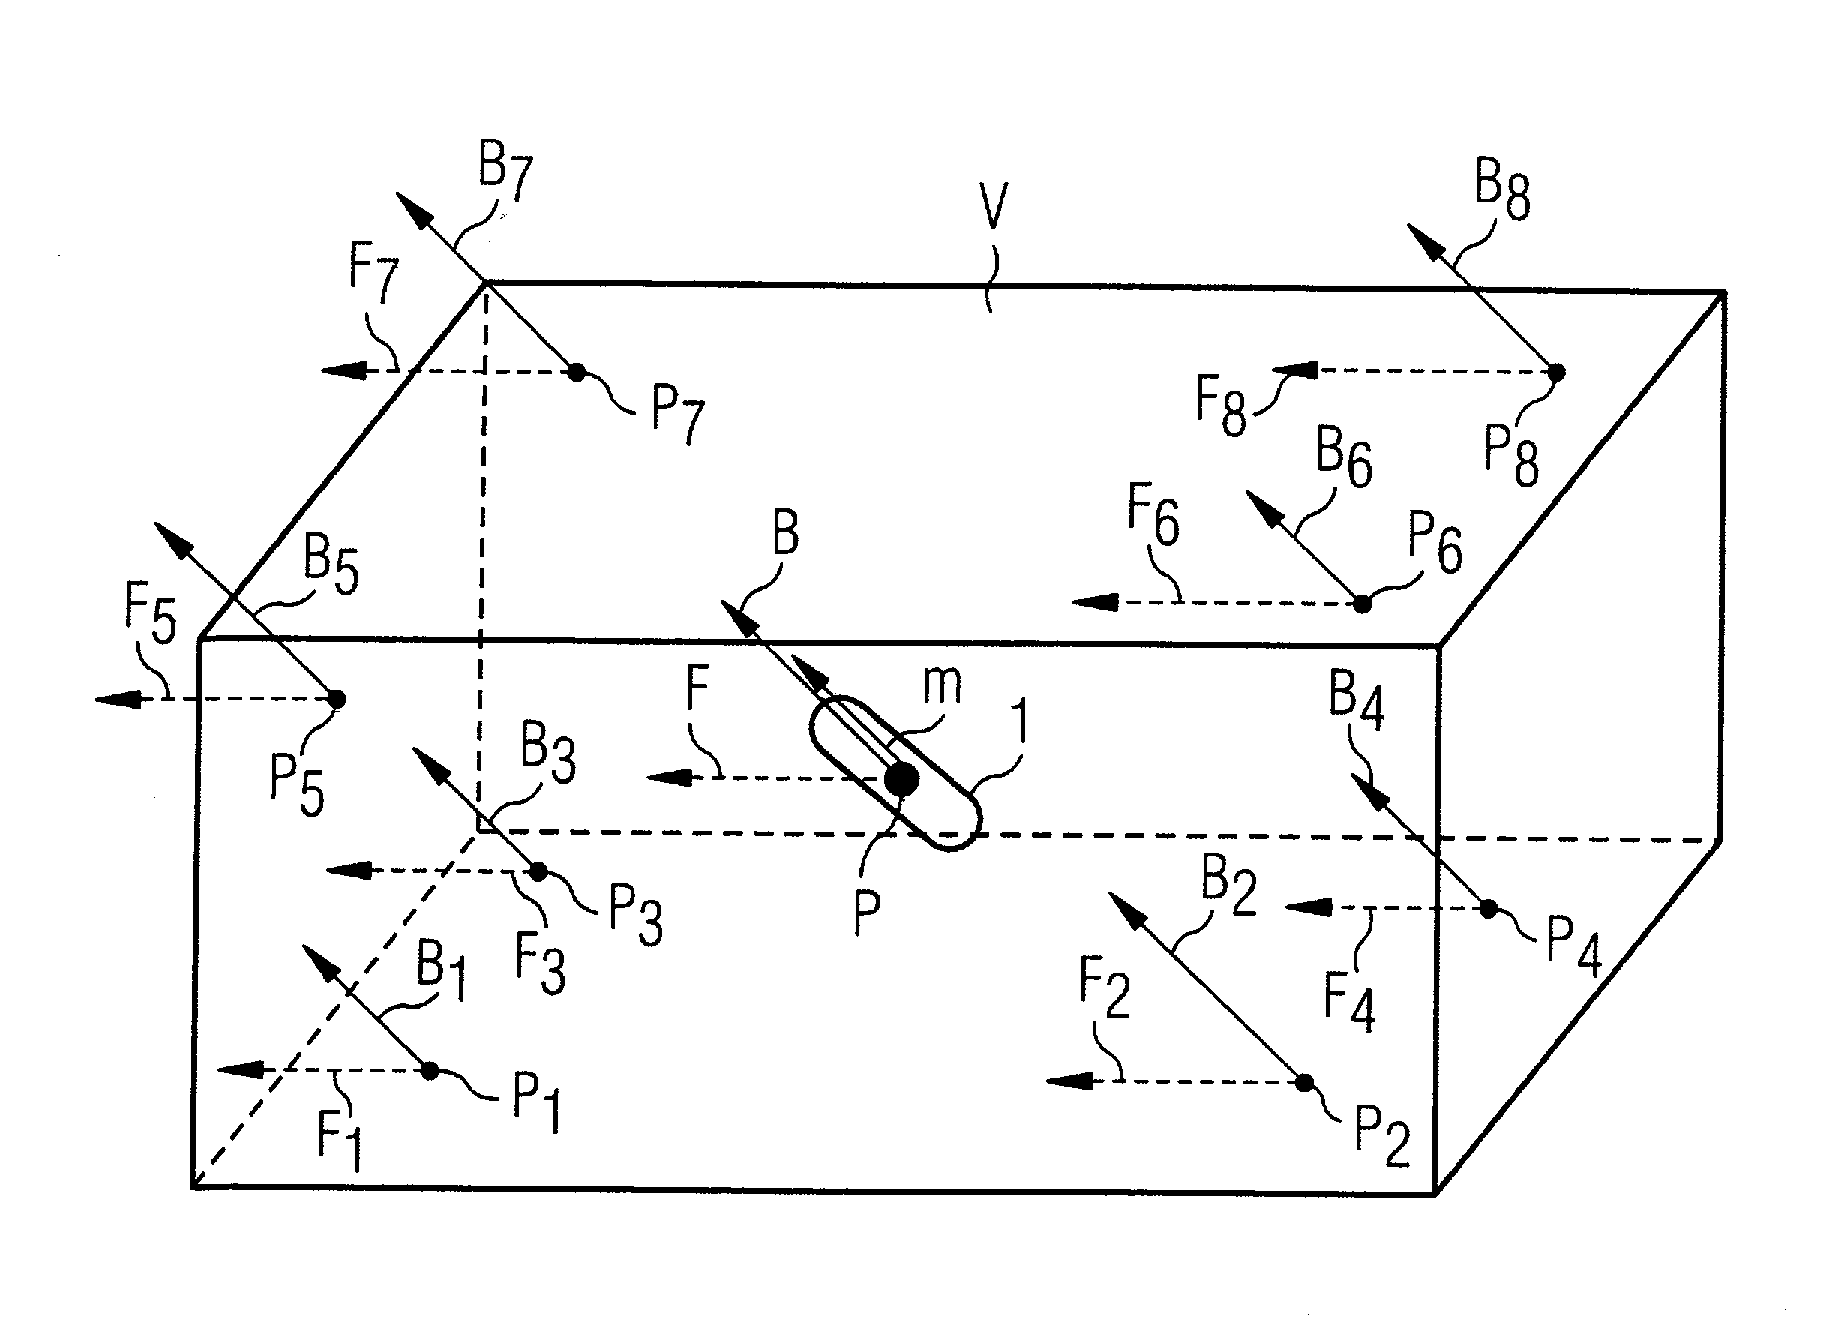 Coil system for the contact-free magnetic navigation of a magnetic body in a working space